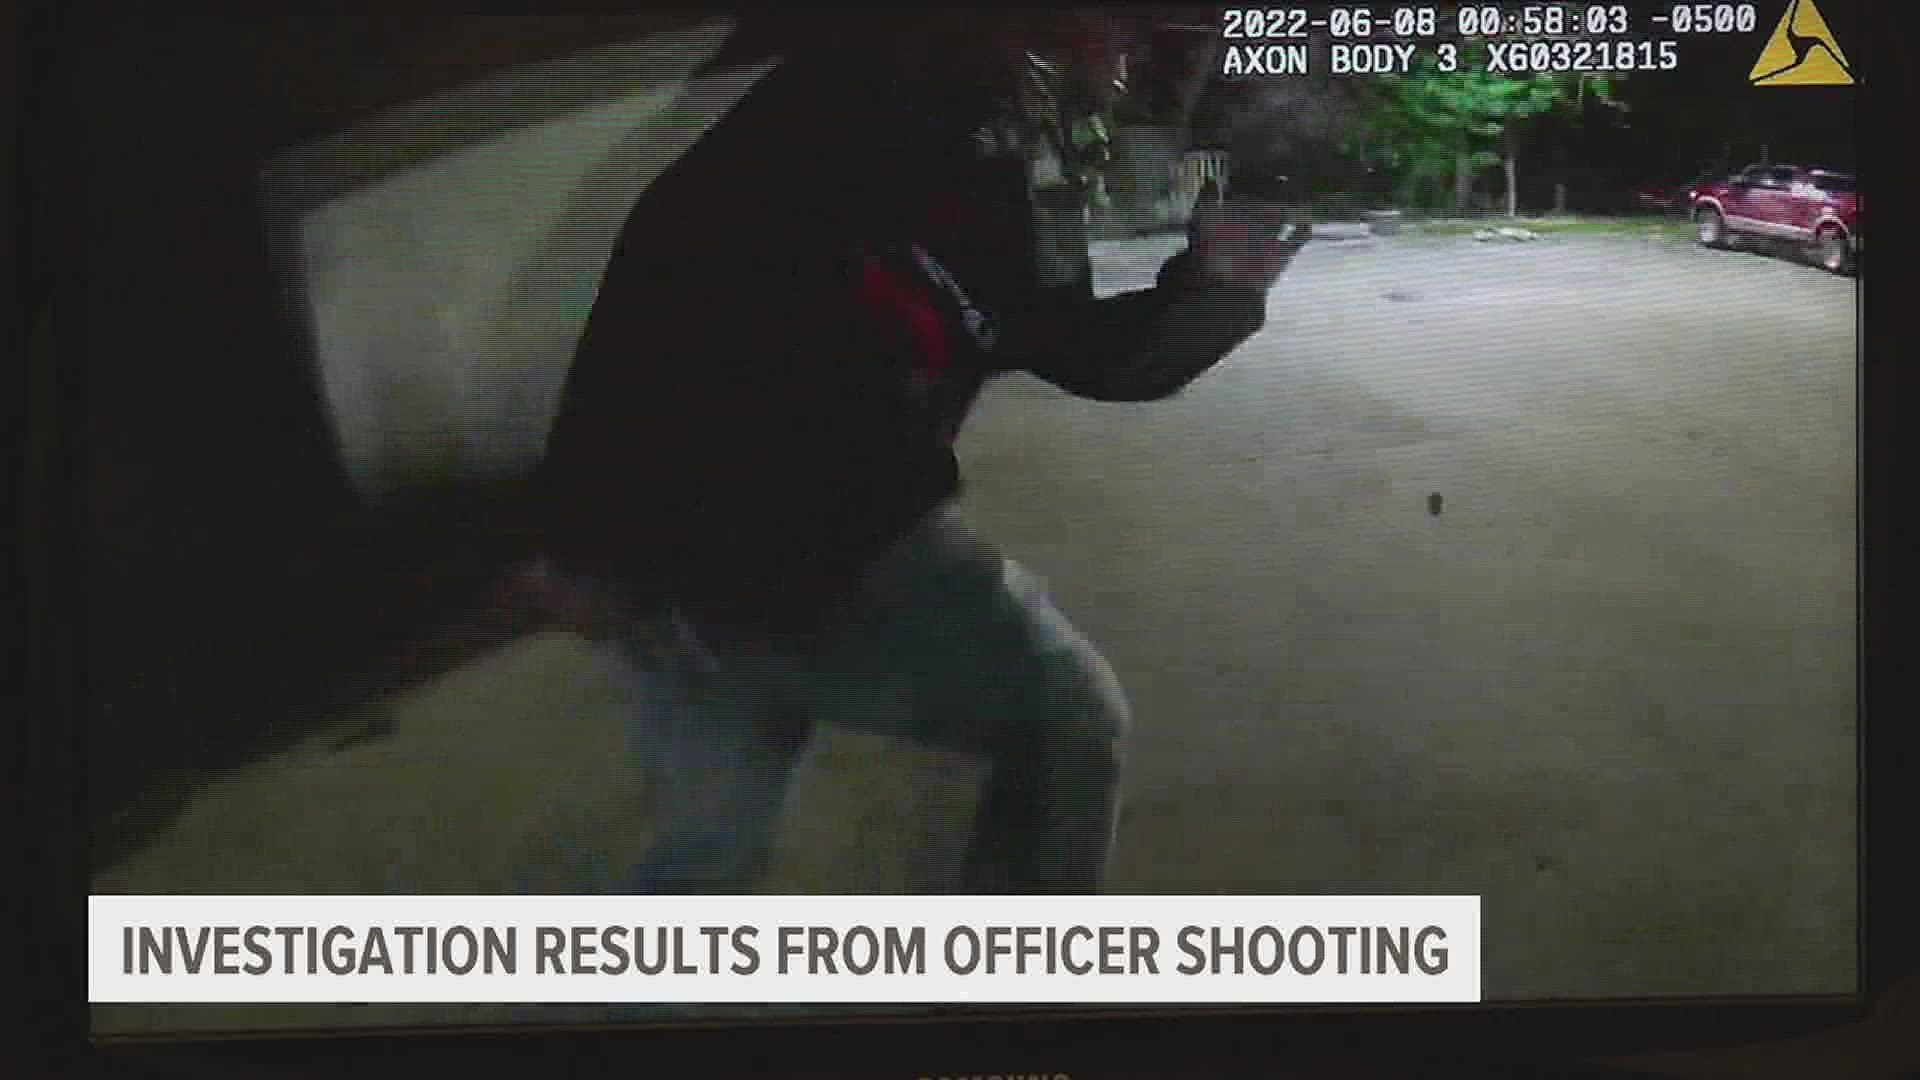 The office released body camera footage that shows how the encounter escalated with Jason Morales drawing and firing a gun at Officer Michael Catton.